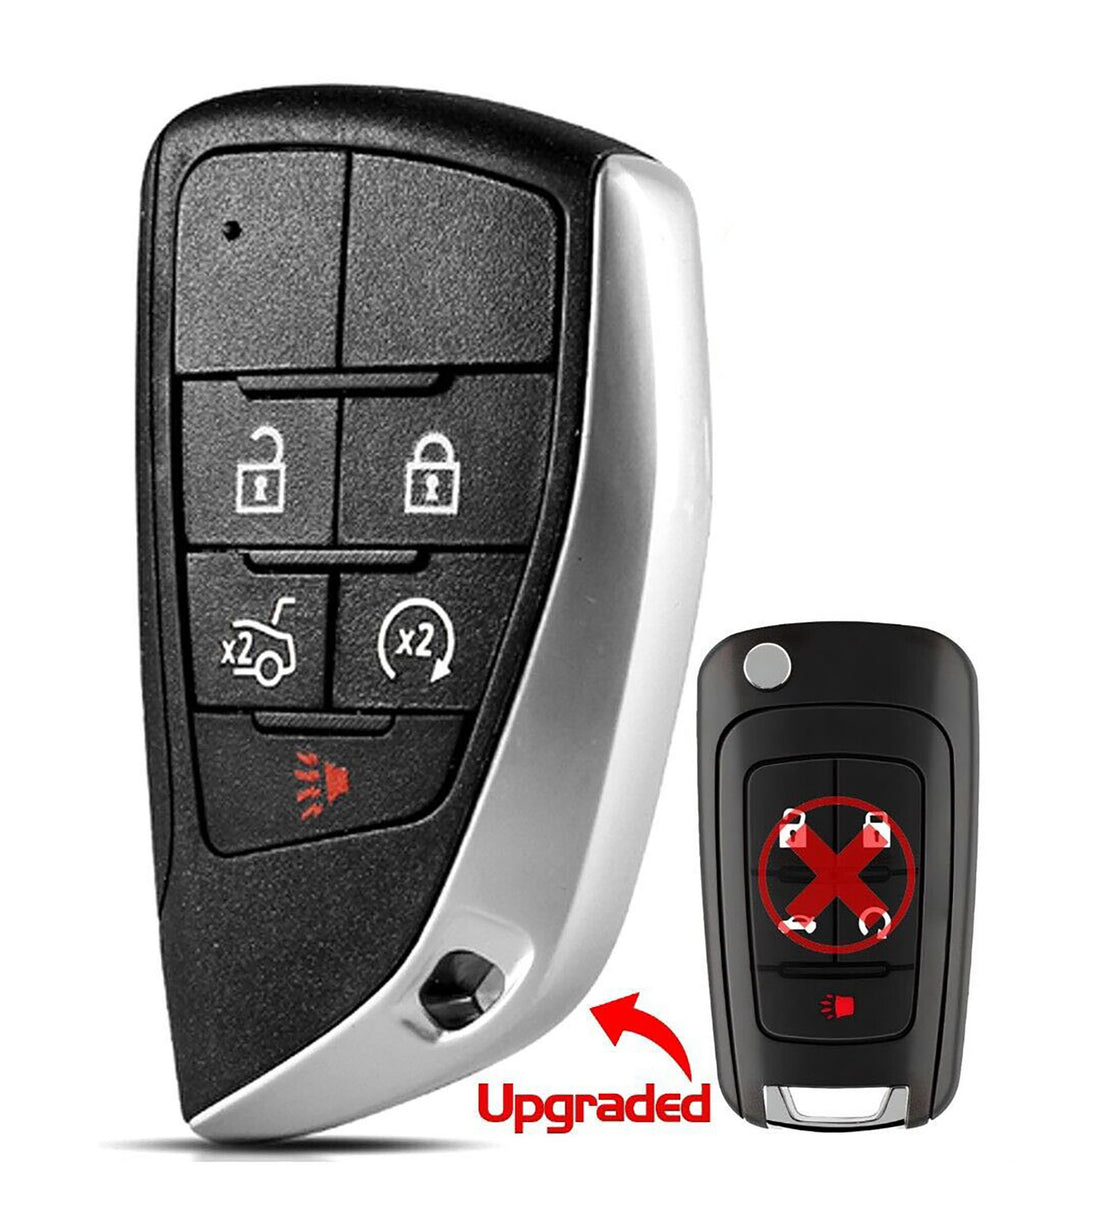 1x New Quality Replacement Key Fob Remote SHELL / CASE Compatible with & Fit For Buick & Chevrolet - MPN KR55WK50073-M-04 (NO electronics or Chip inside)